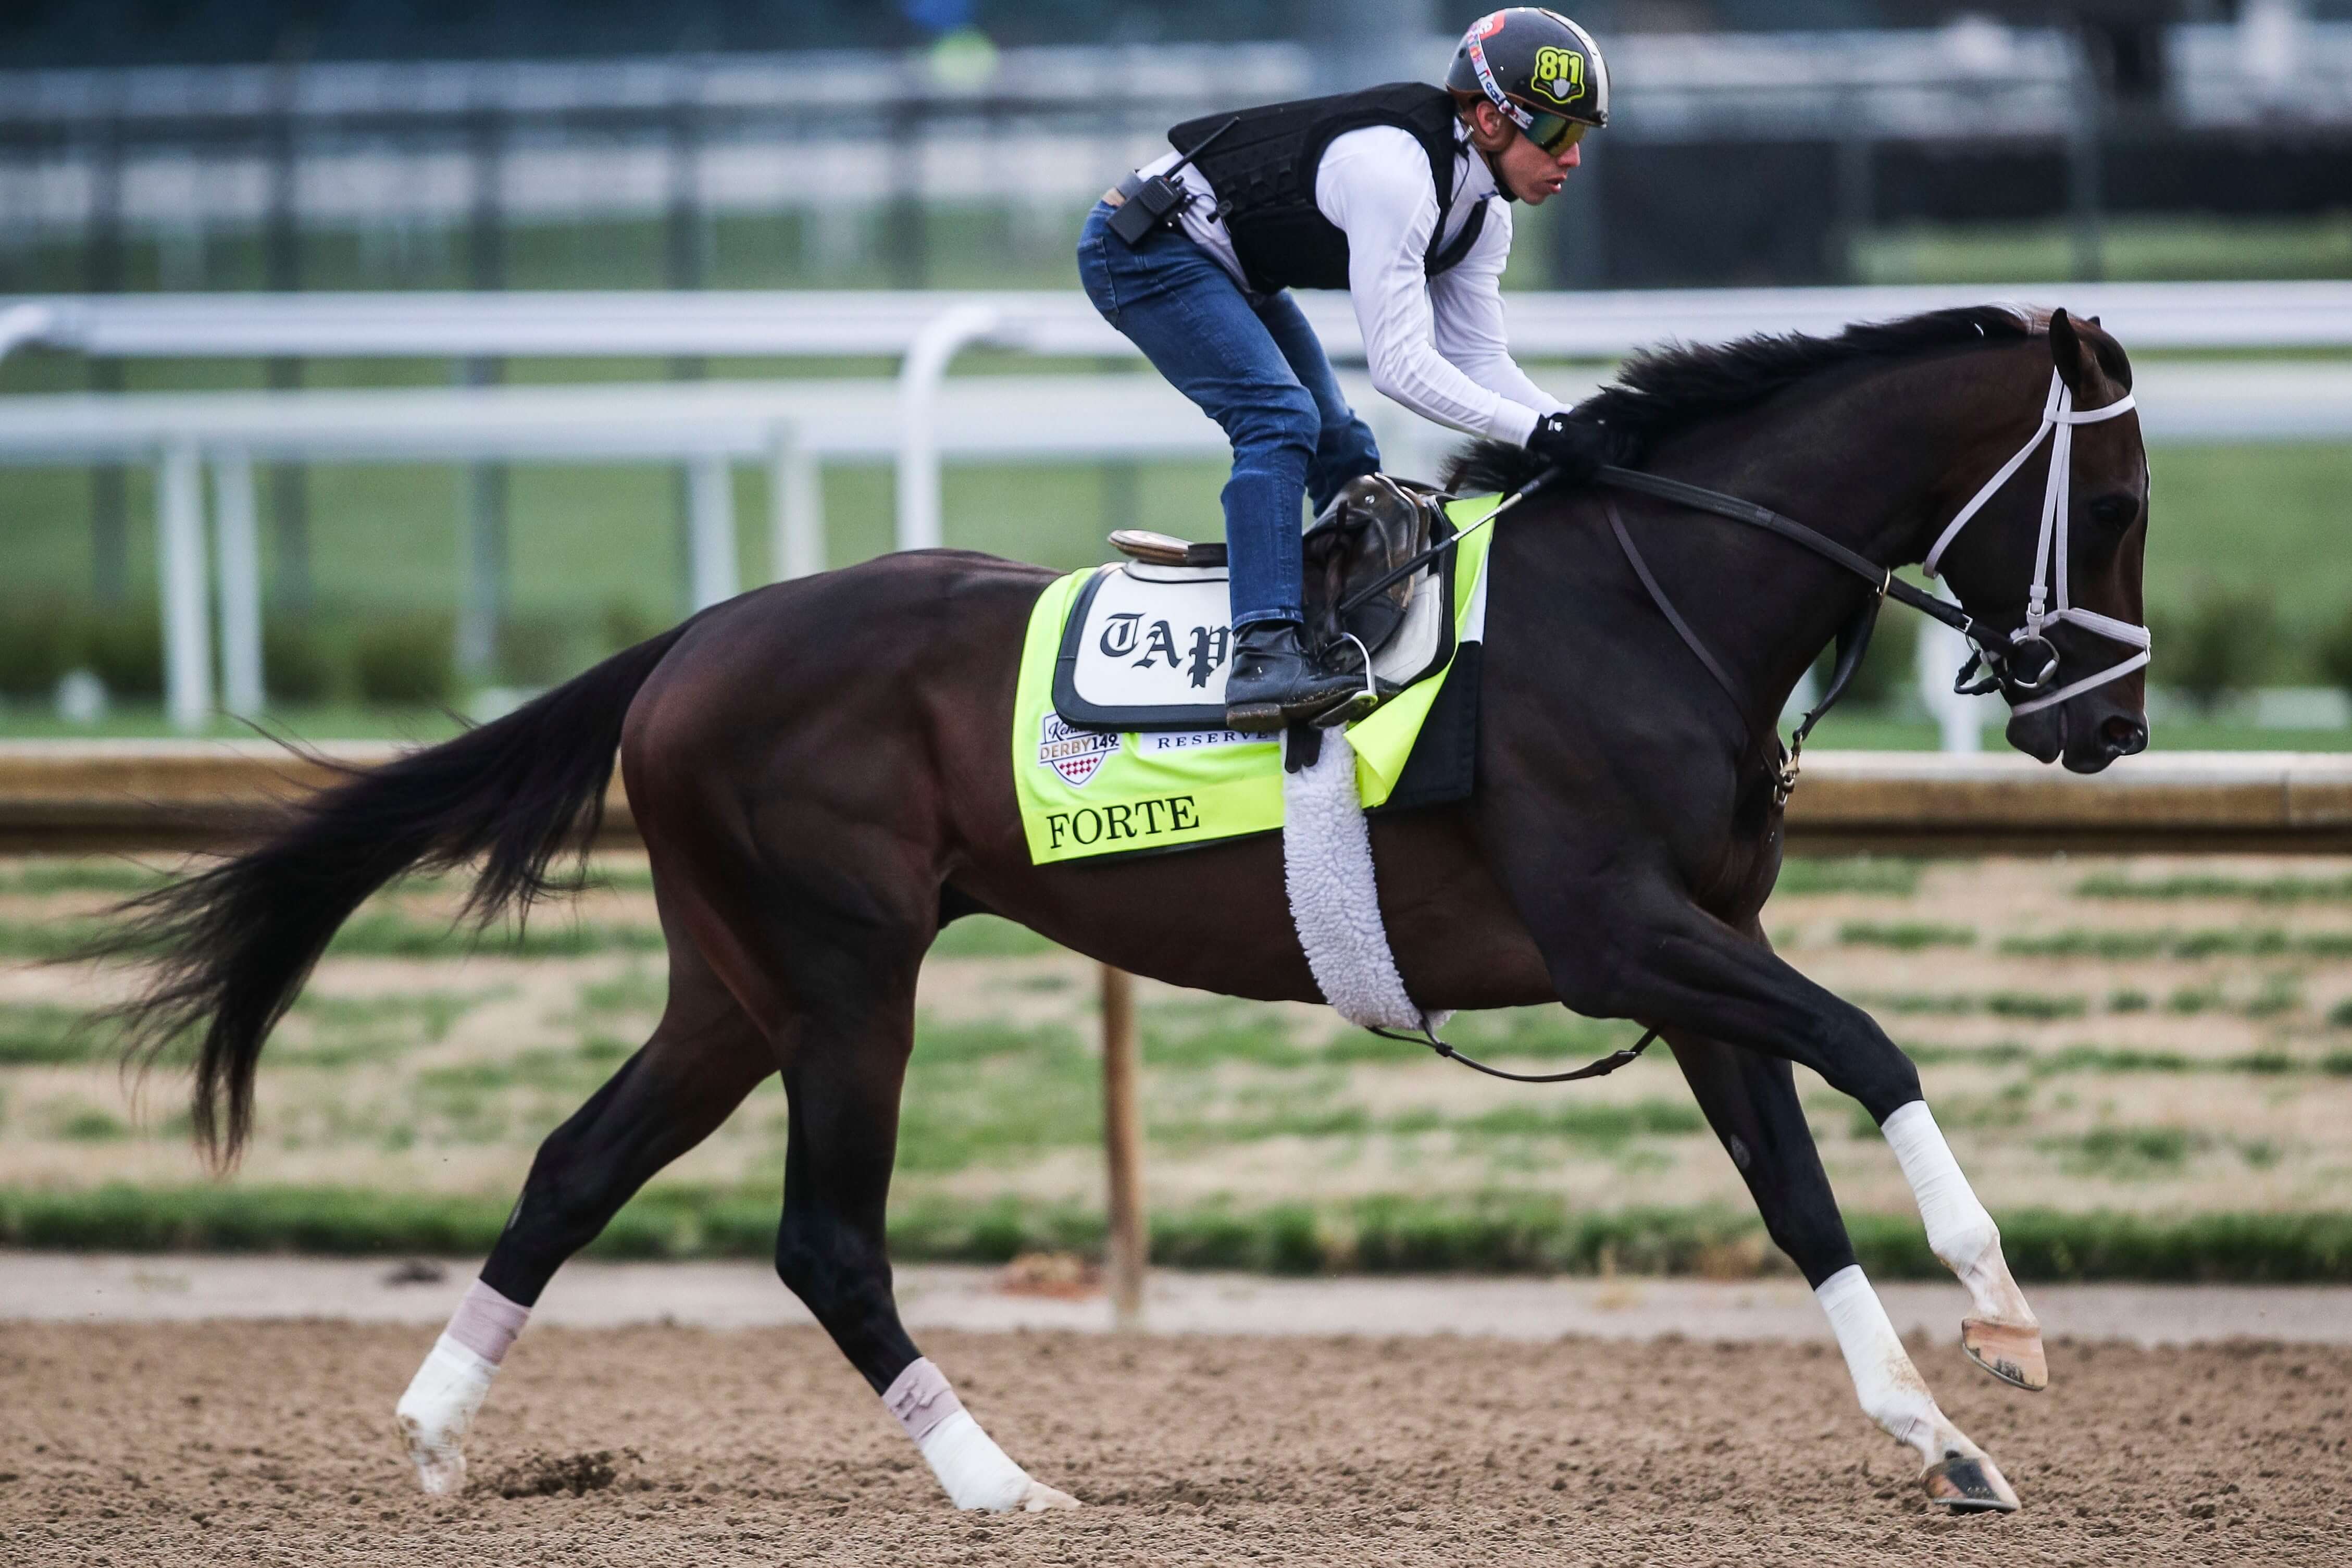 How To Bet - 2023 Belmont Stakes Odds & Betting Lines: Forte Set as 5/2 Favorite